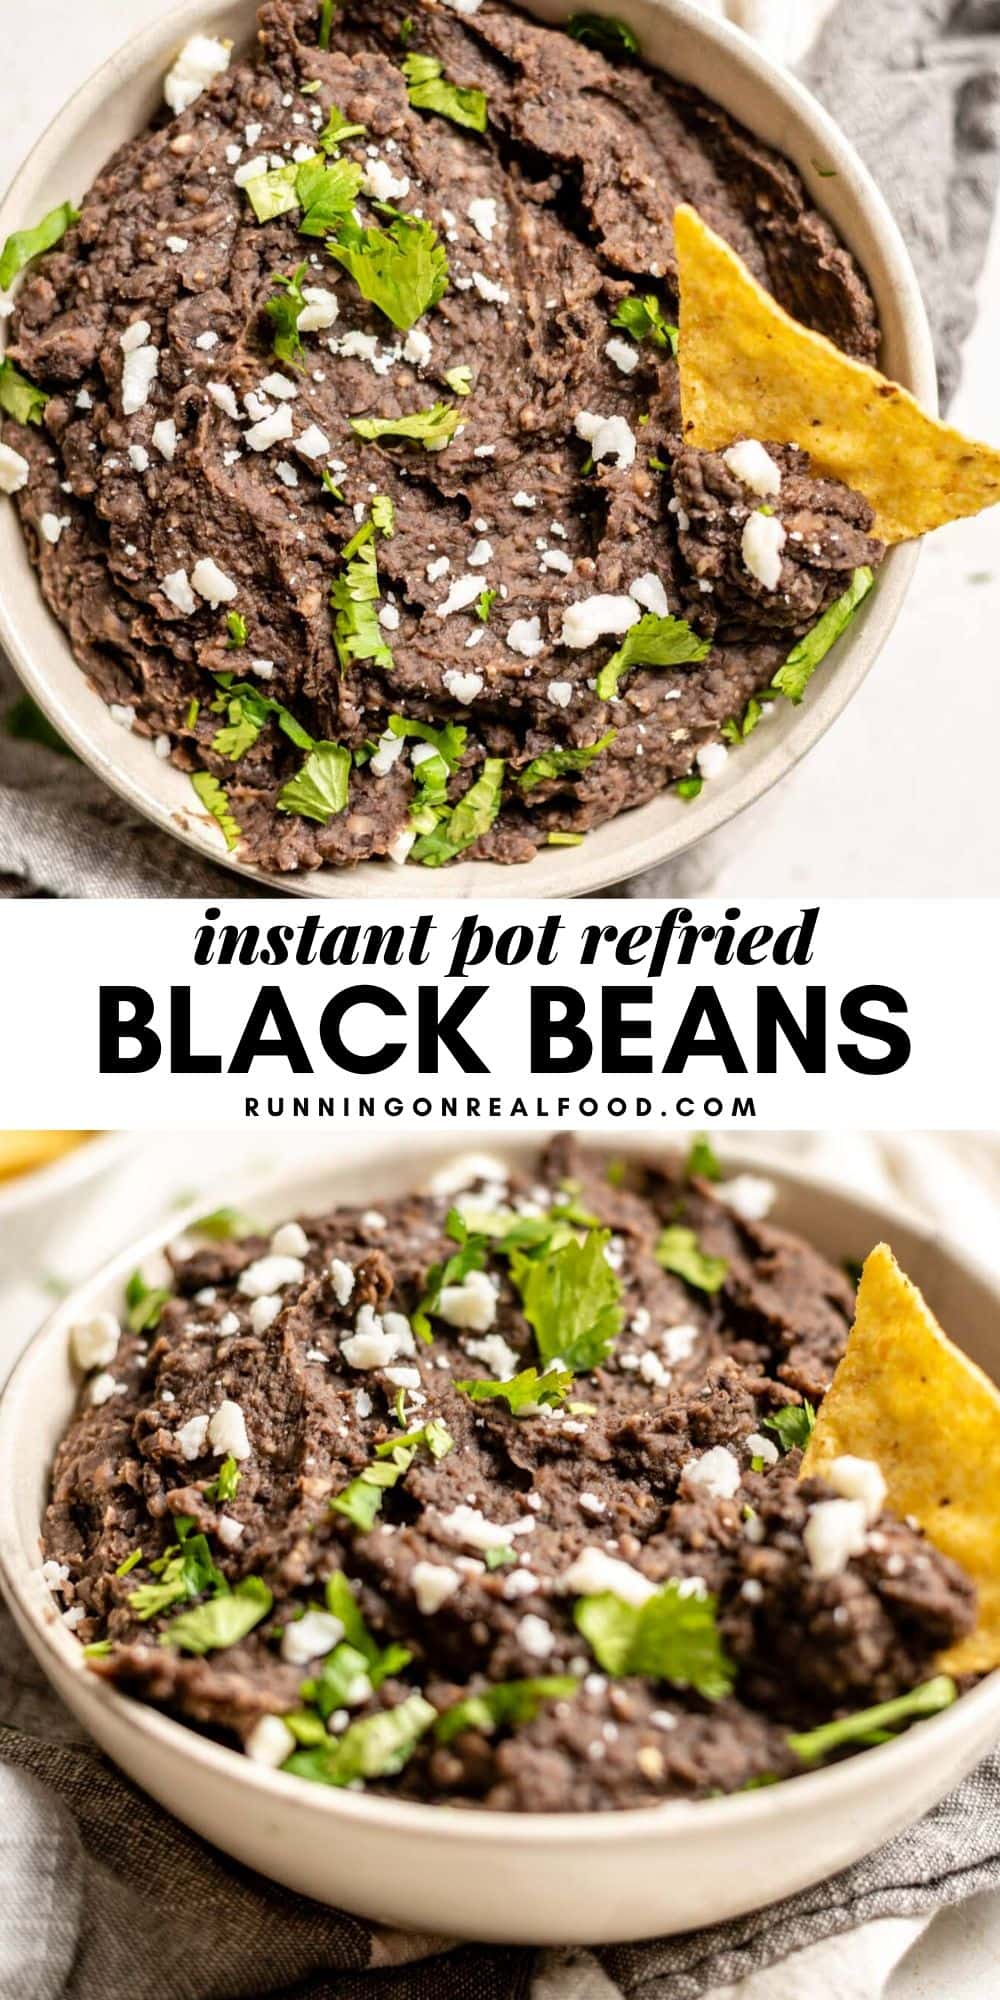 Instant Pot Refried Black Beans - Running on Real Food